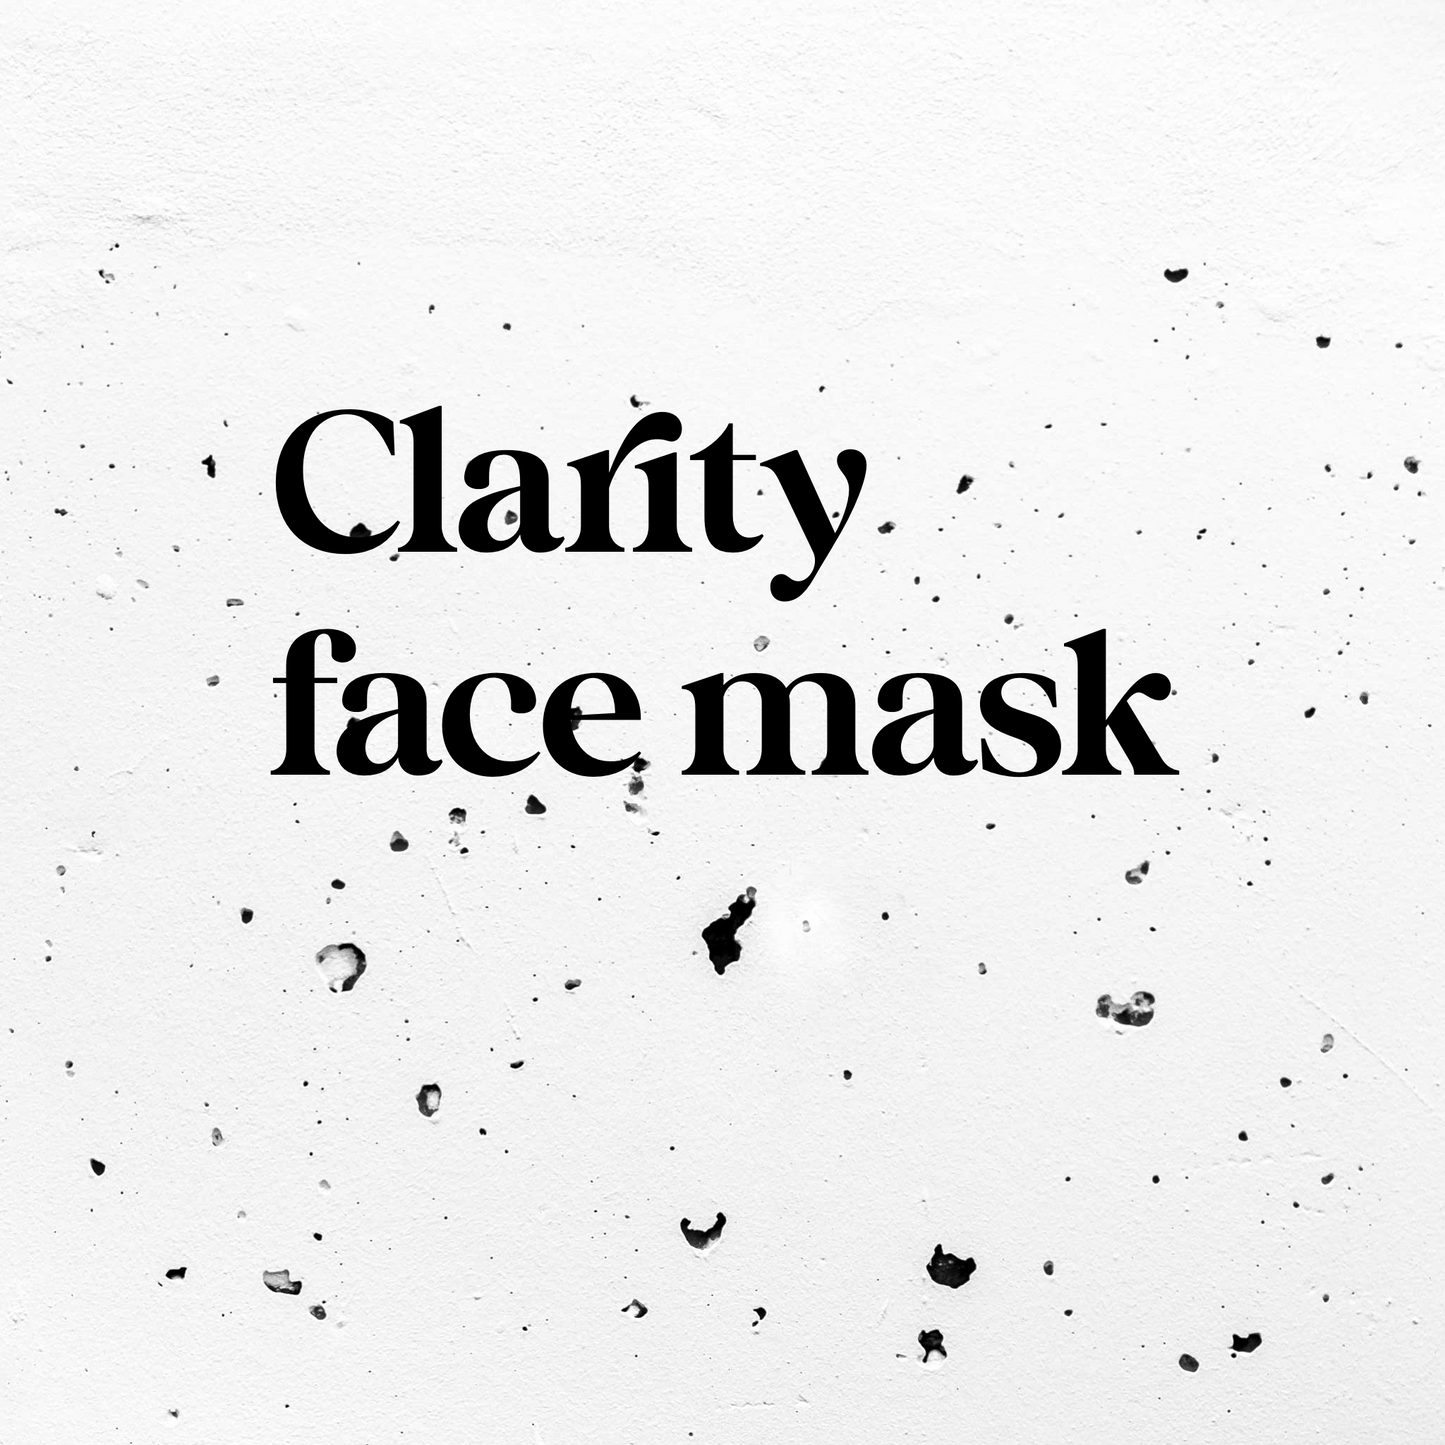 Clarity lotion face mask